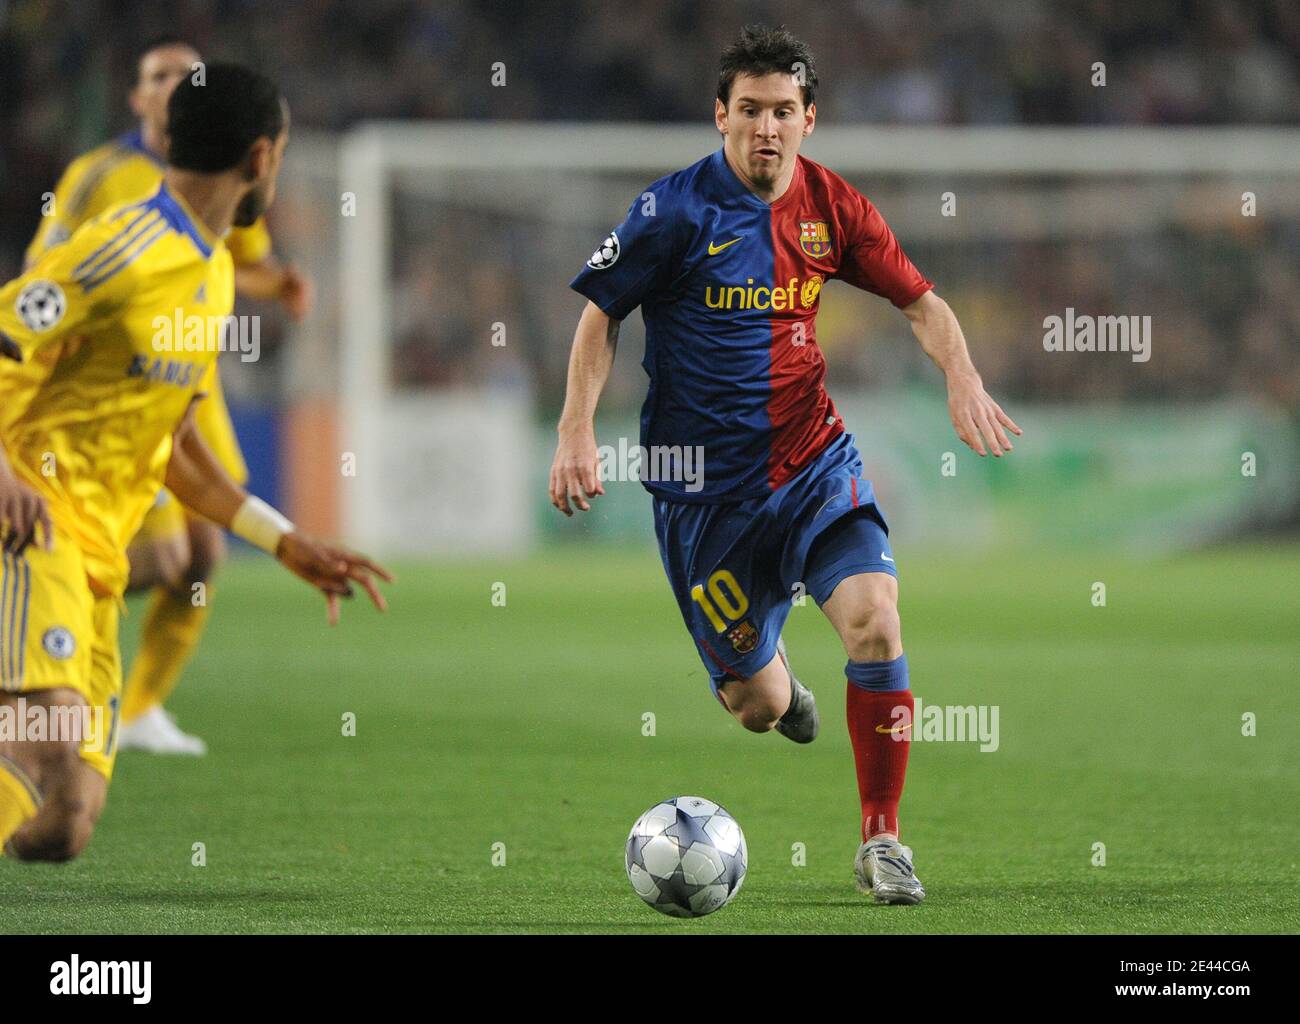 Fc Barcelona S Lionel Messi During The Uefa Champions League Semi Final First Leg Barcelona Vs Chelsea At The Nou Camp Stadium In Barcelona Spain On April 28 09 The Match Ended In